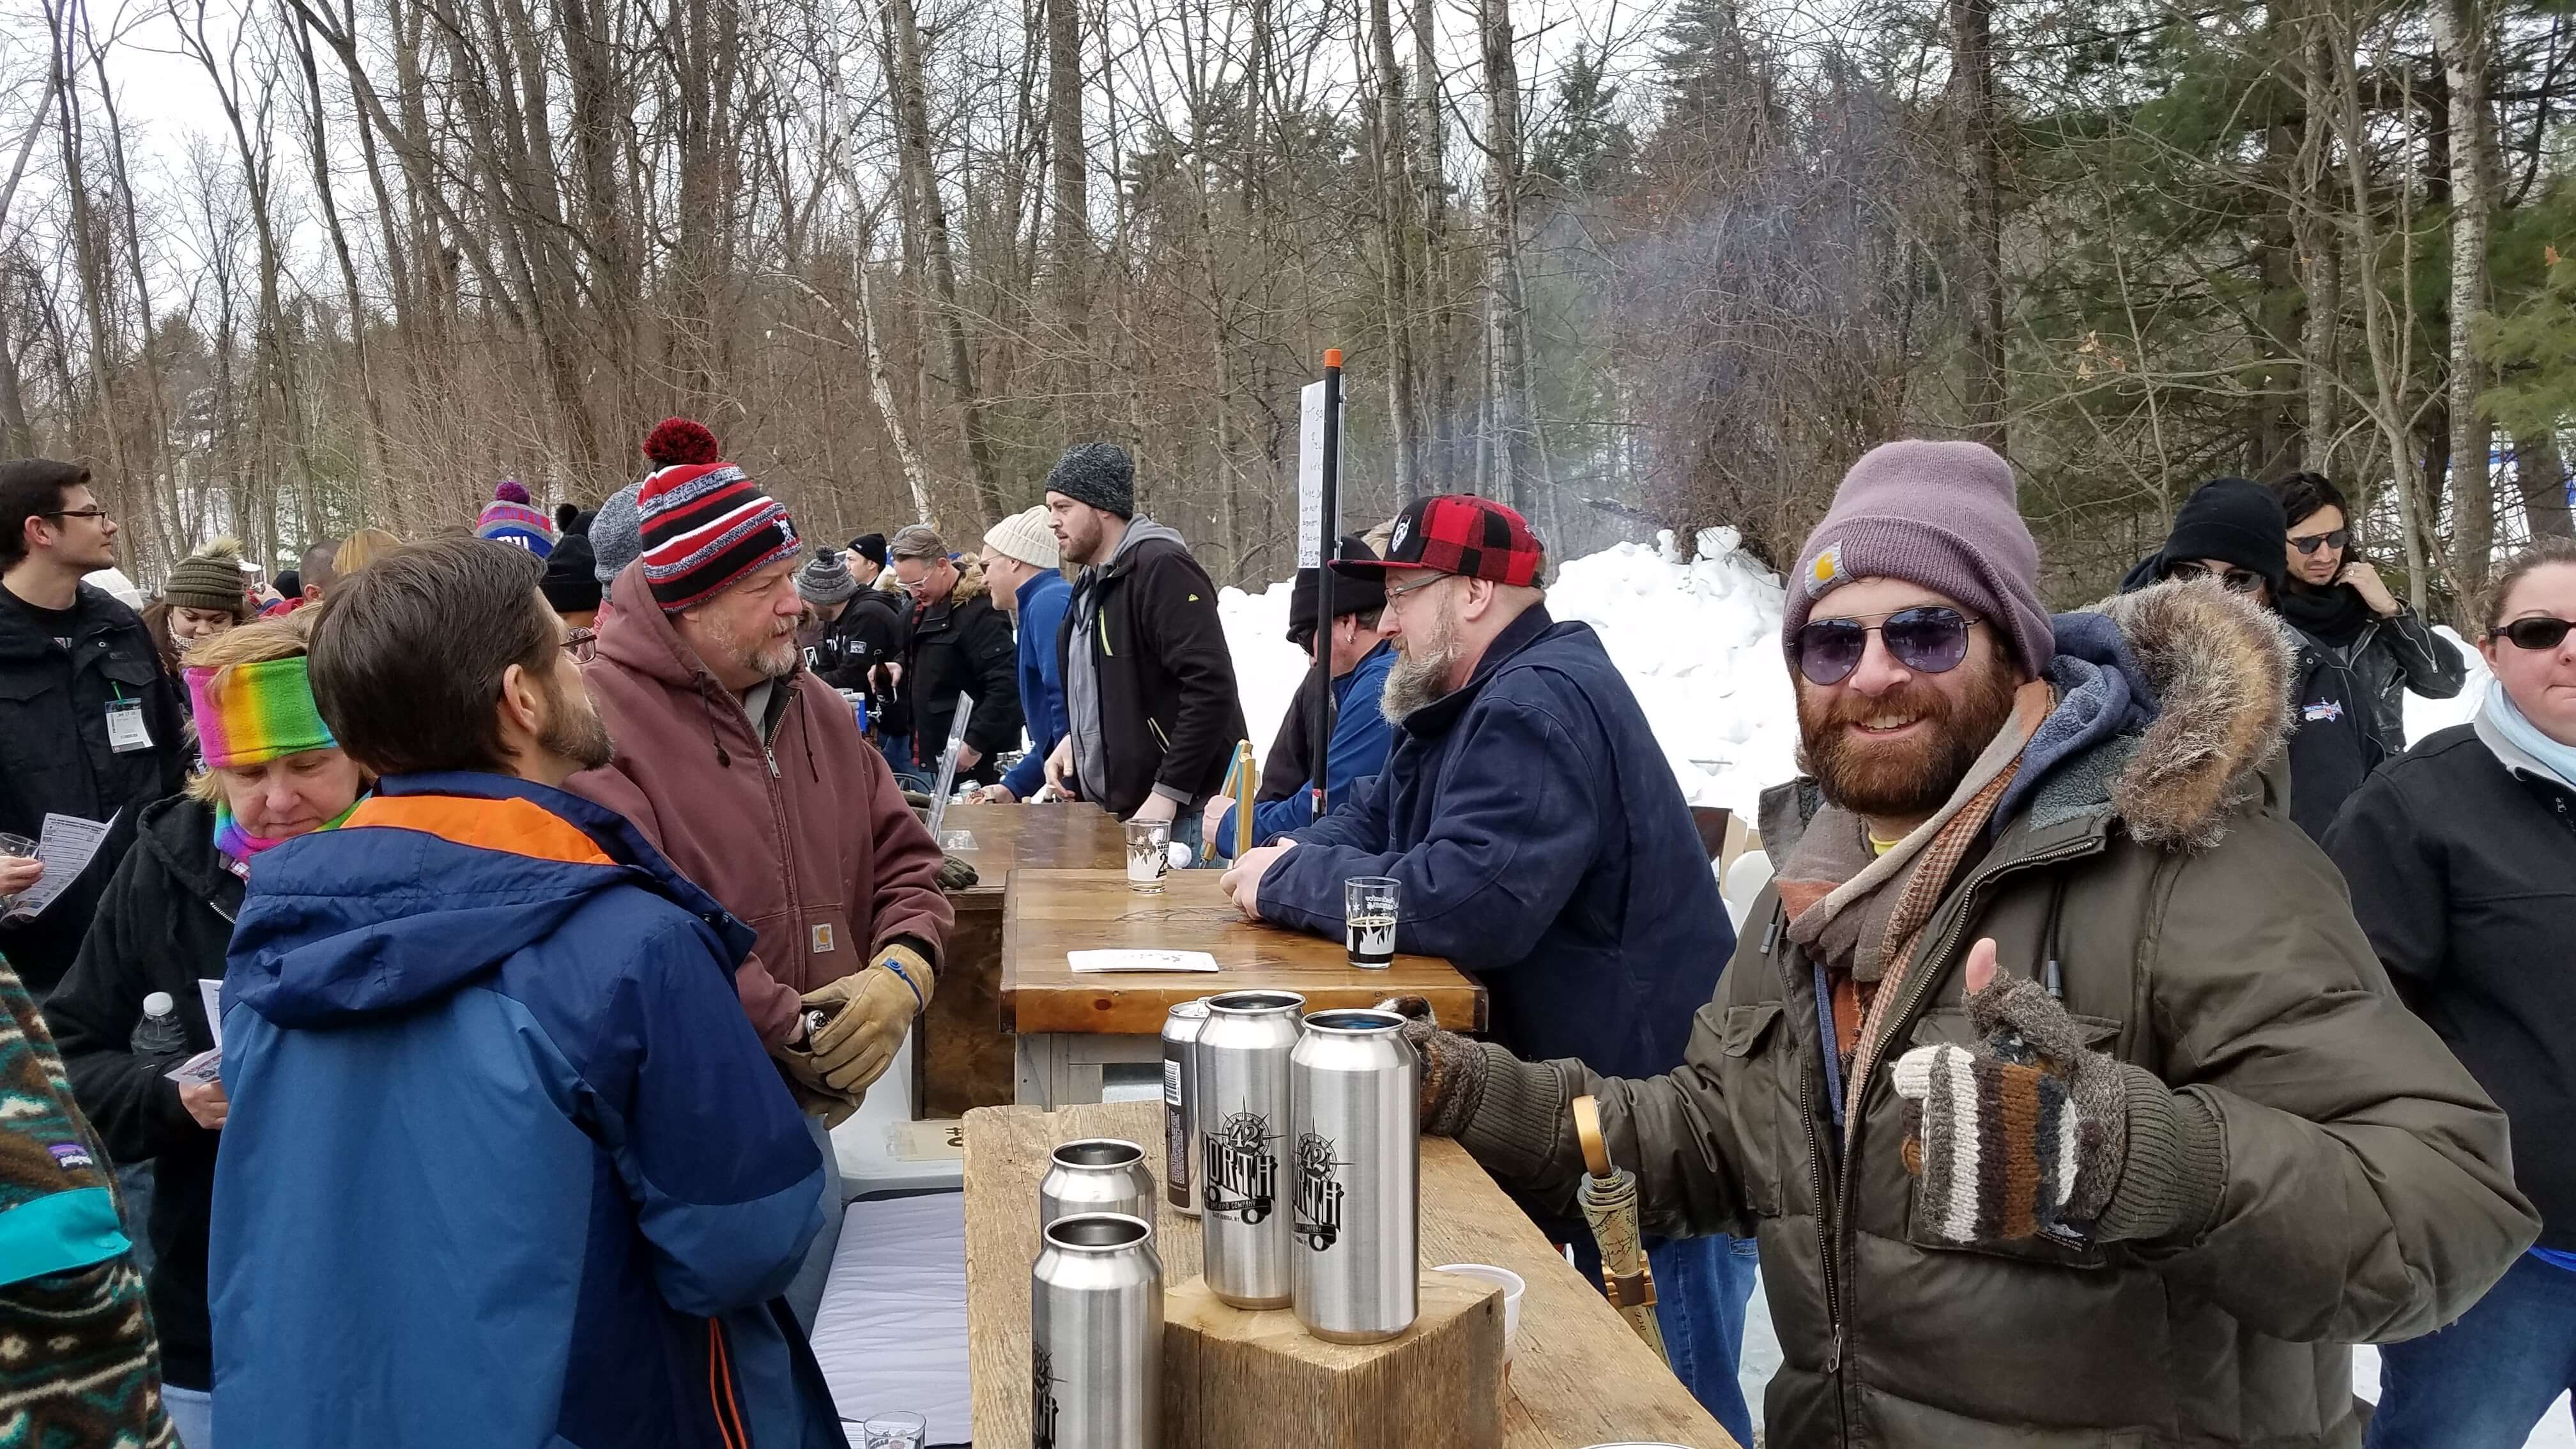 Excitement is brewing for Barrel Fest 2022 in Lake George